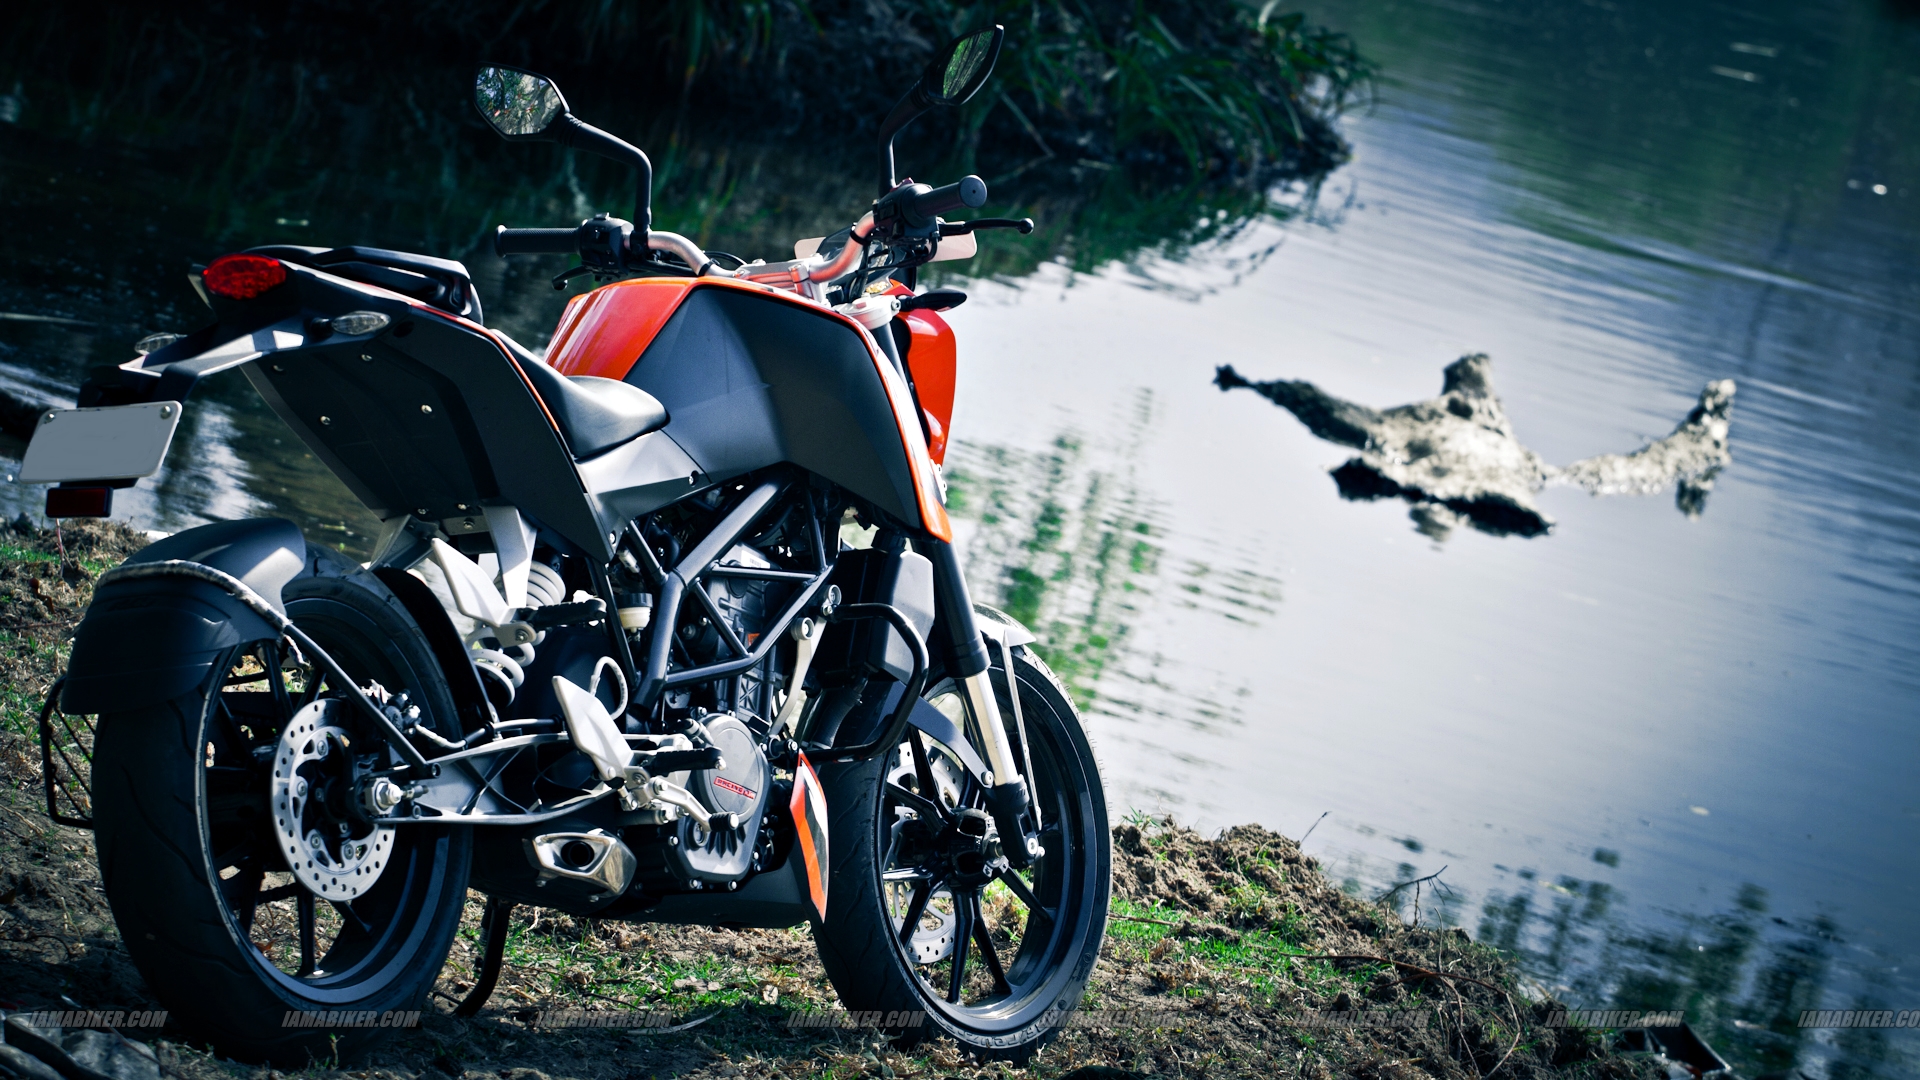 KTM Duke 200 HD wallpaper gallery Click on picture to see high 1920x1080